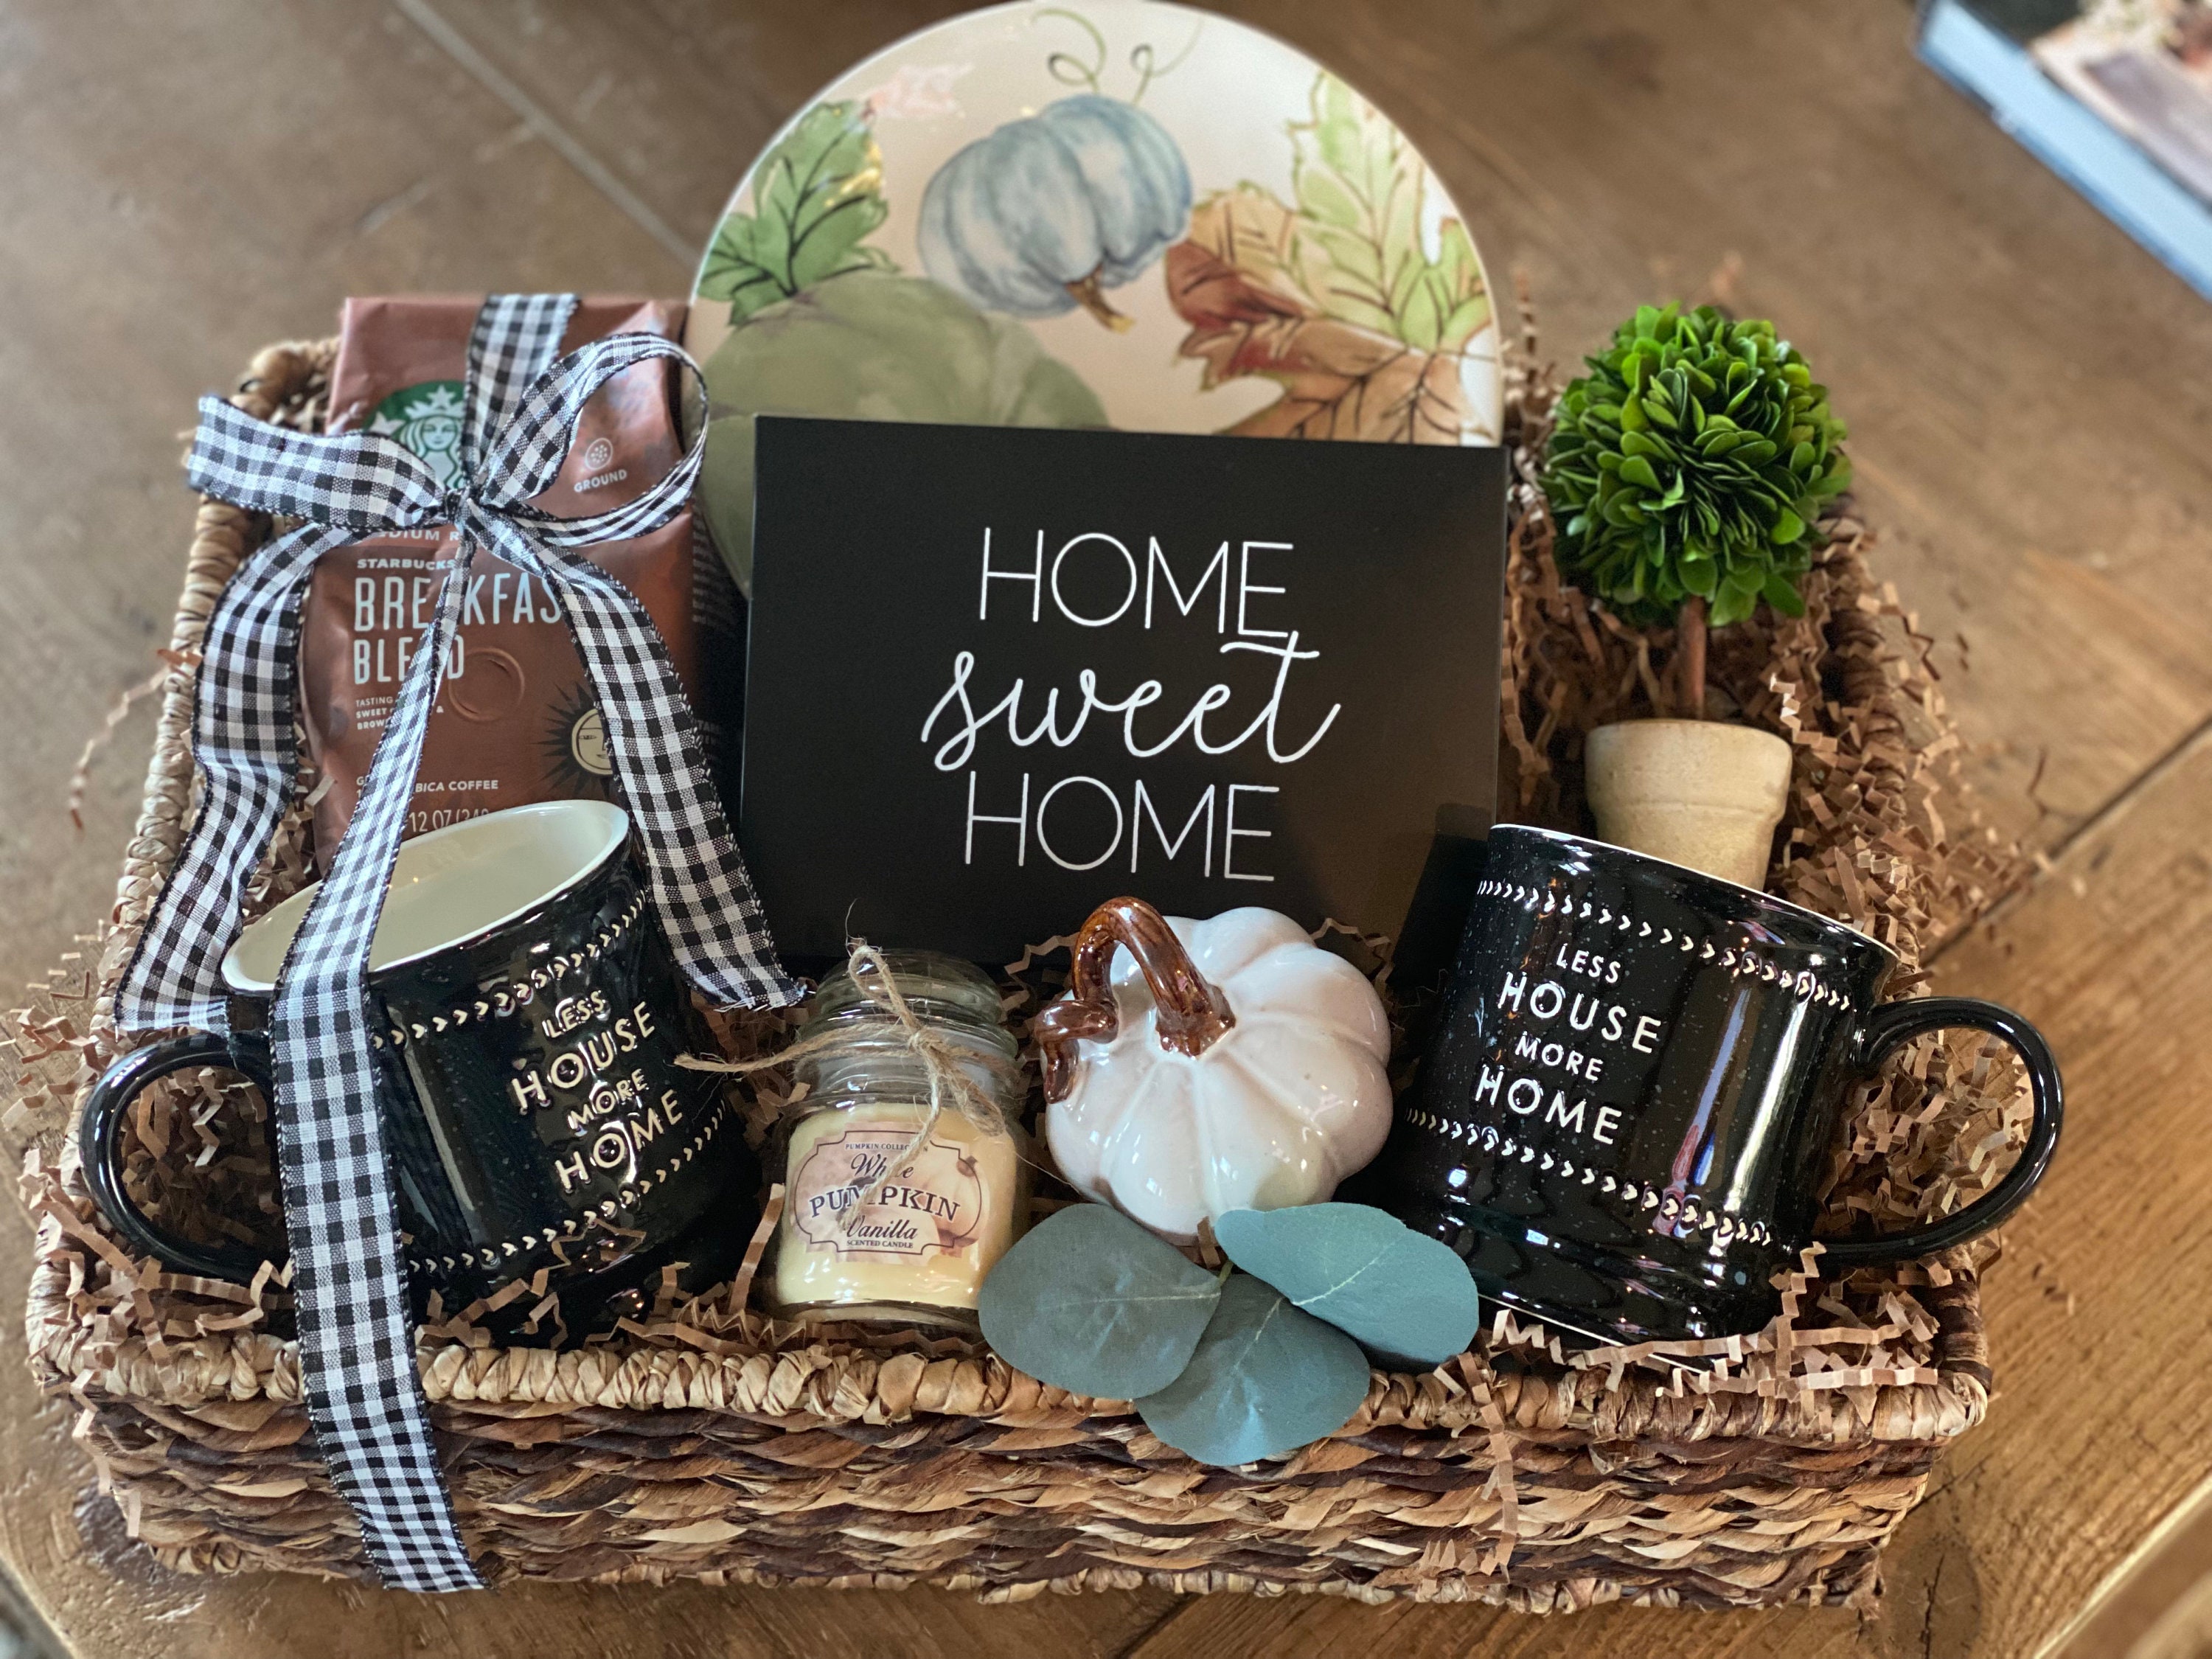 Home Sweet Home Housewarming Gift Basket from Thoughtful Presence